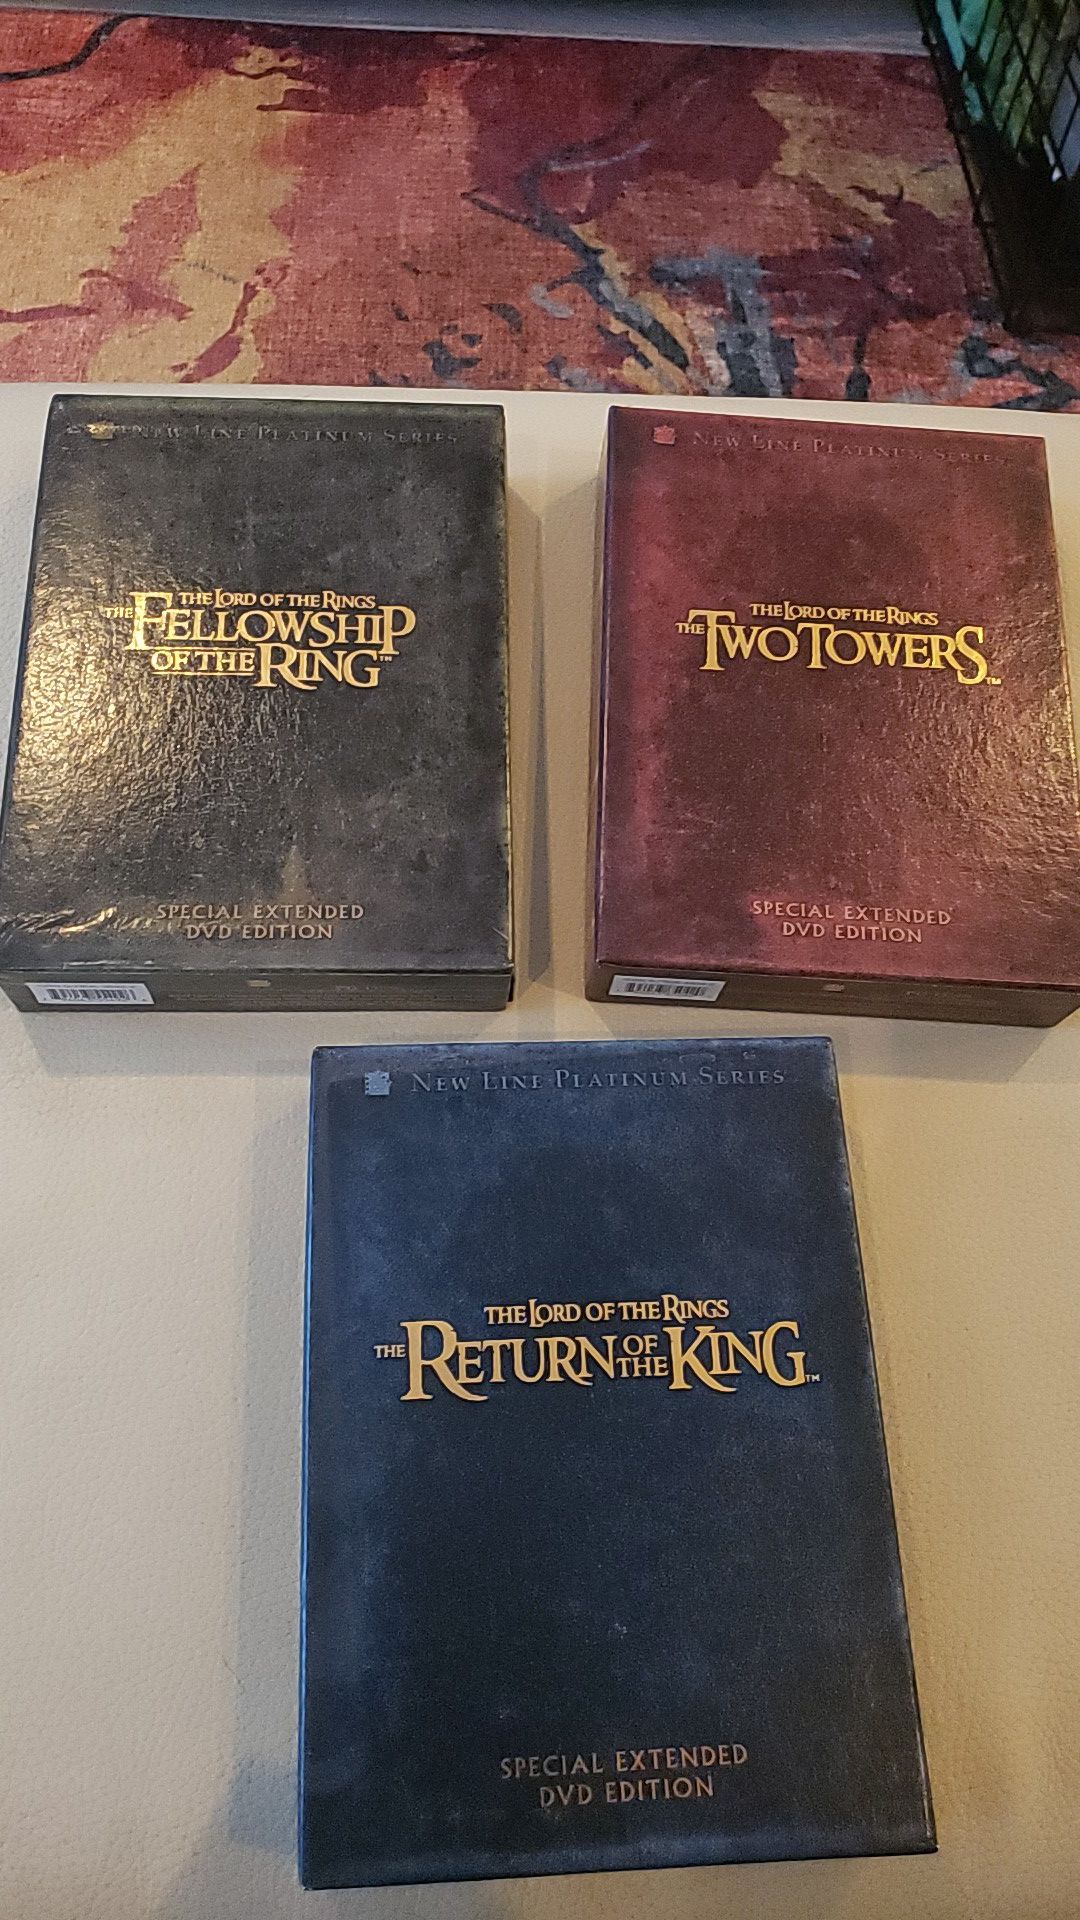 Lord of the Rings trilogy DVD set